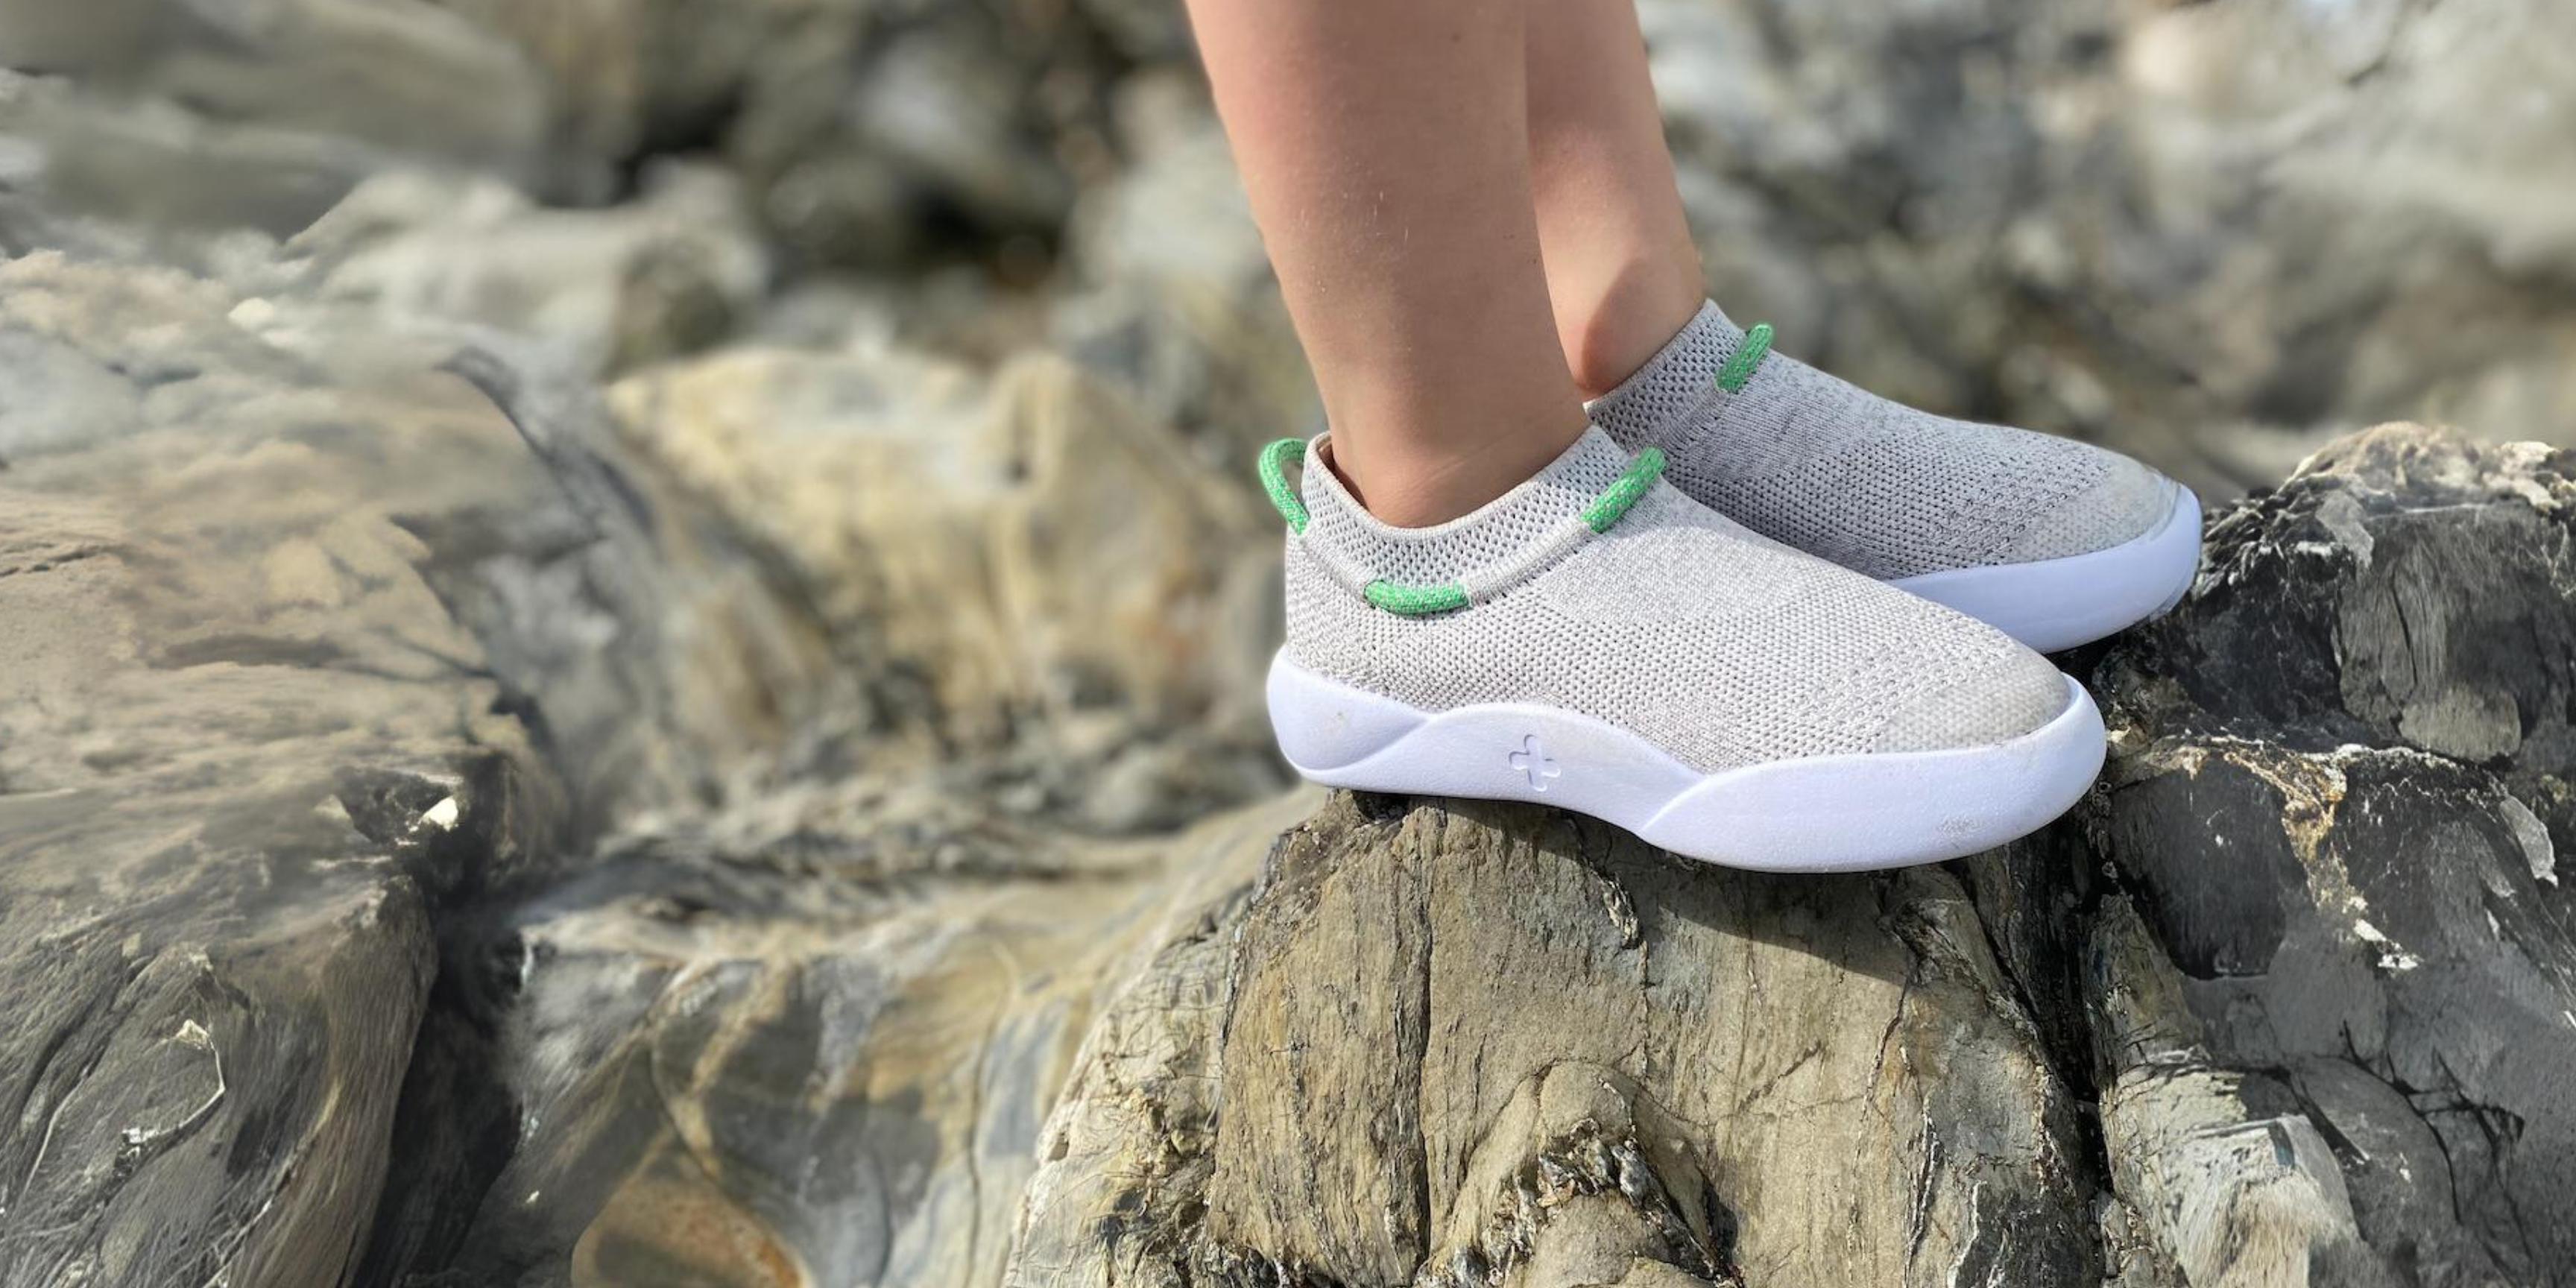 New Lerins Sustainable Trainer Brand Launched by The Dune Group